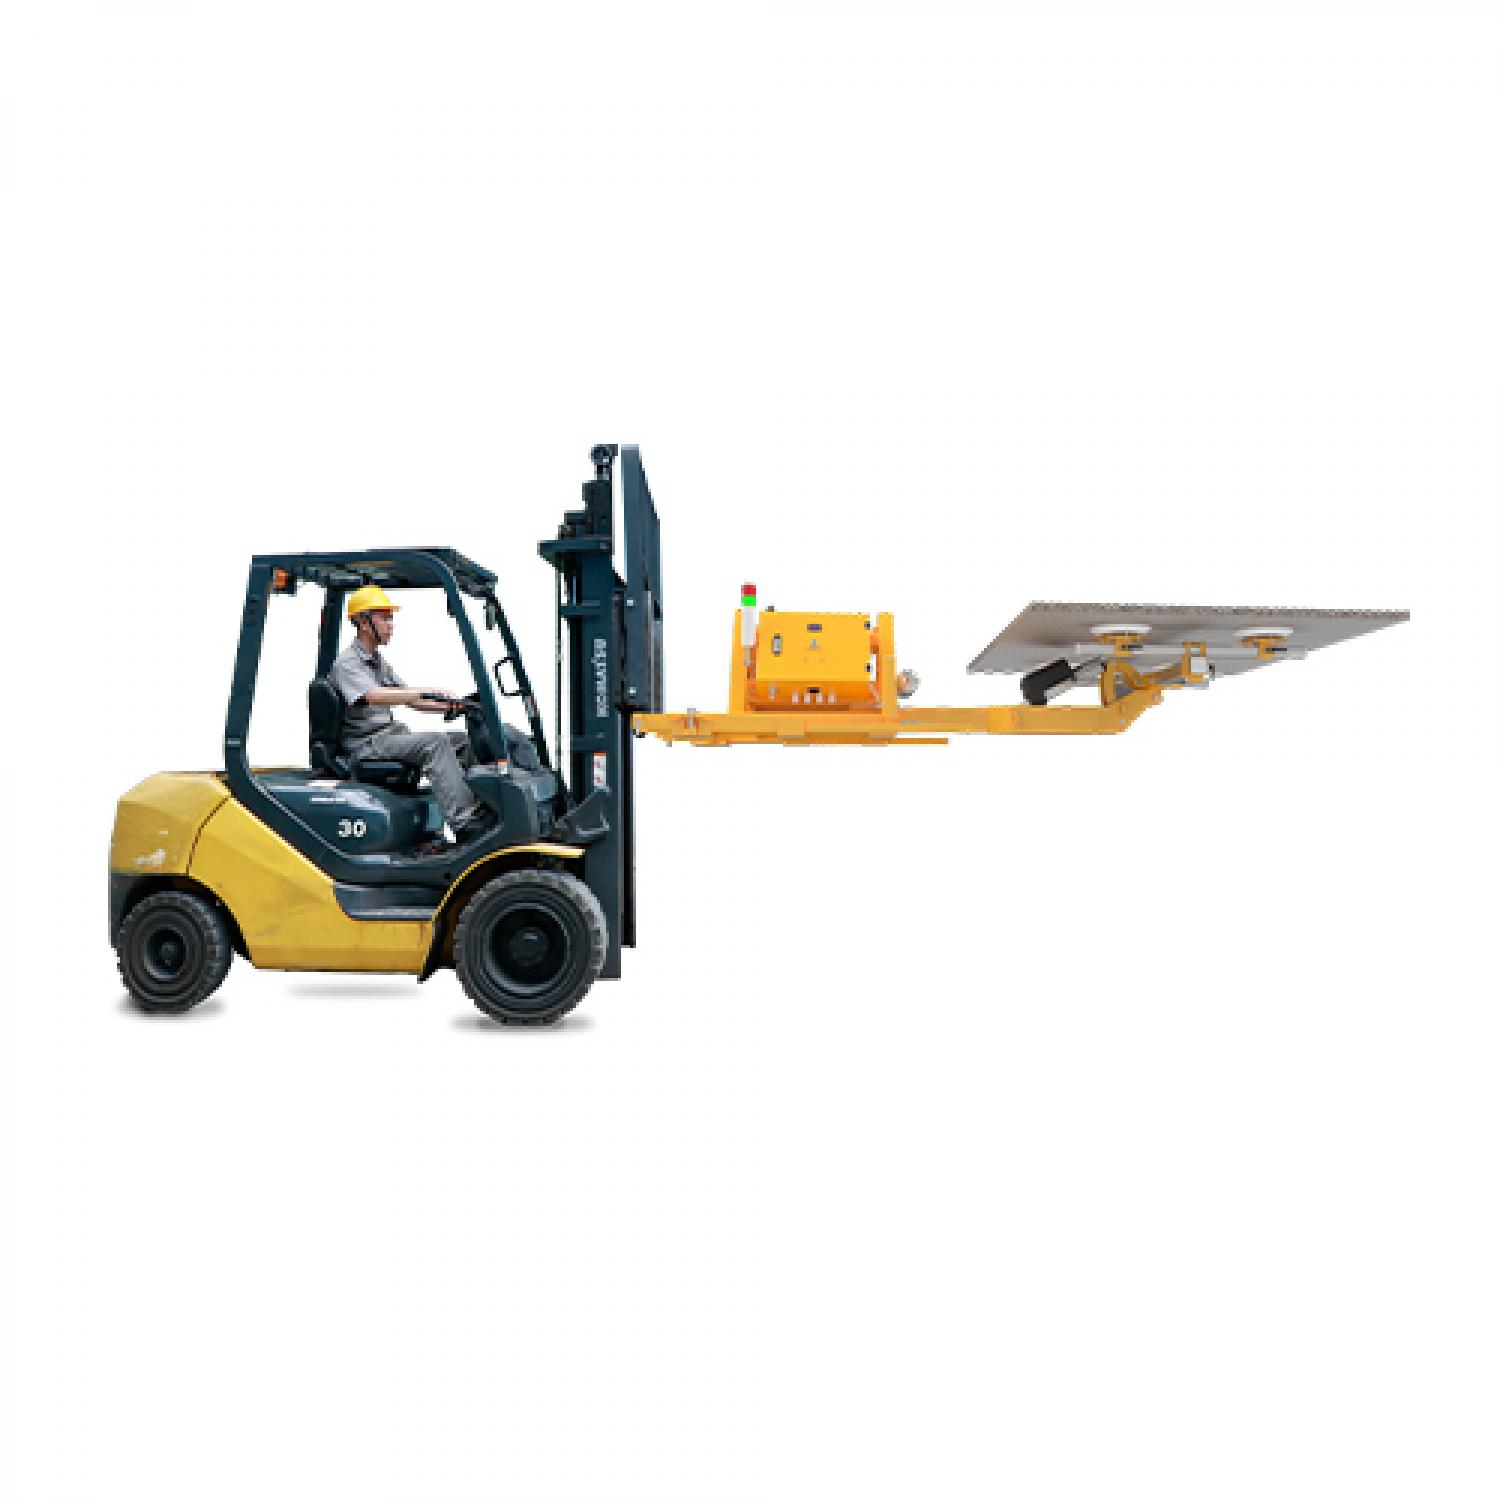 ABACO FORKLIFT POWER VACUUM LIFTER - AFPVL300